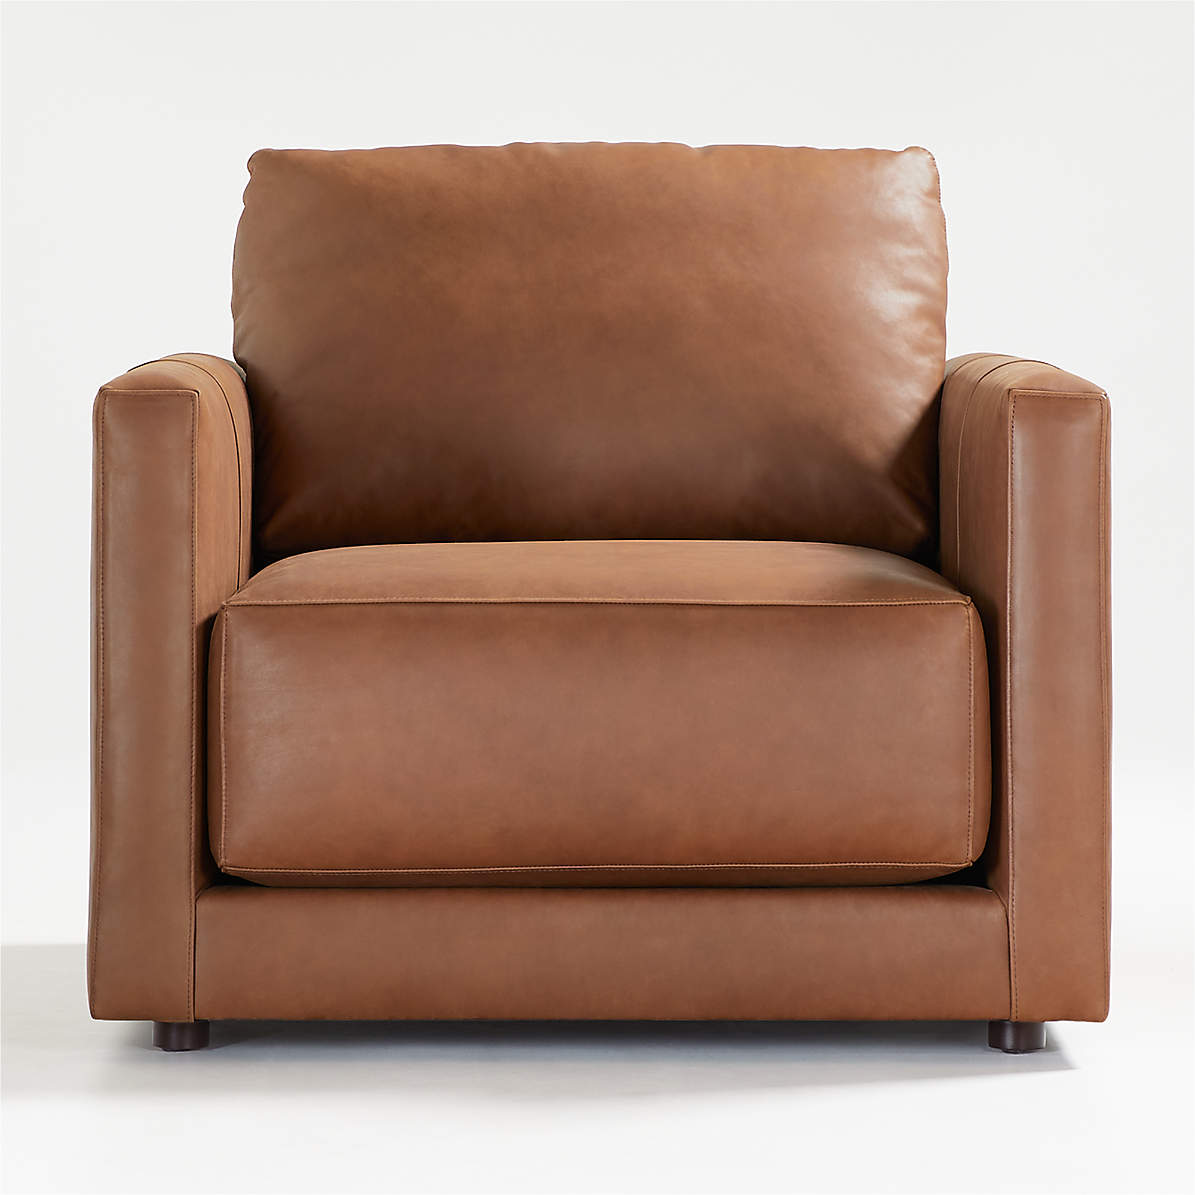 Gather Deep Leather Chair Reviews, Barrel Leather Chair